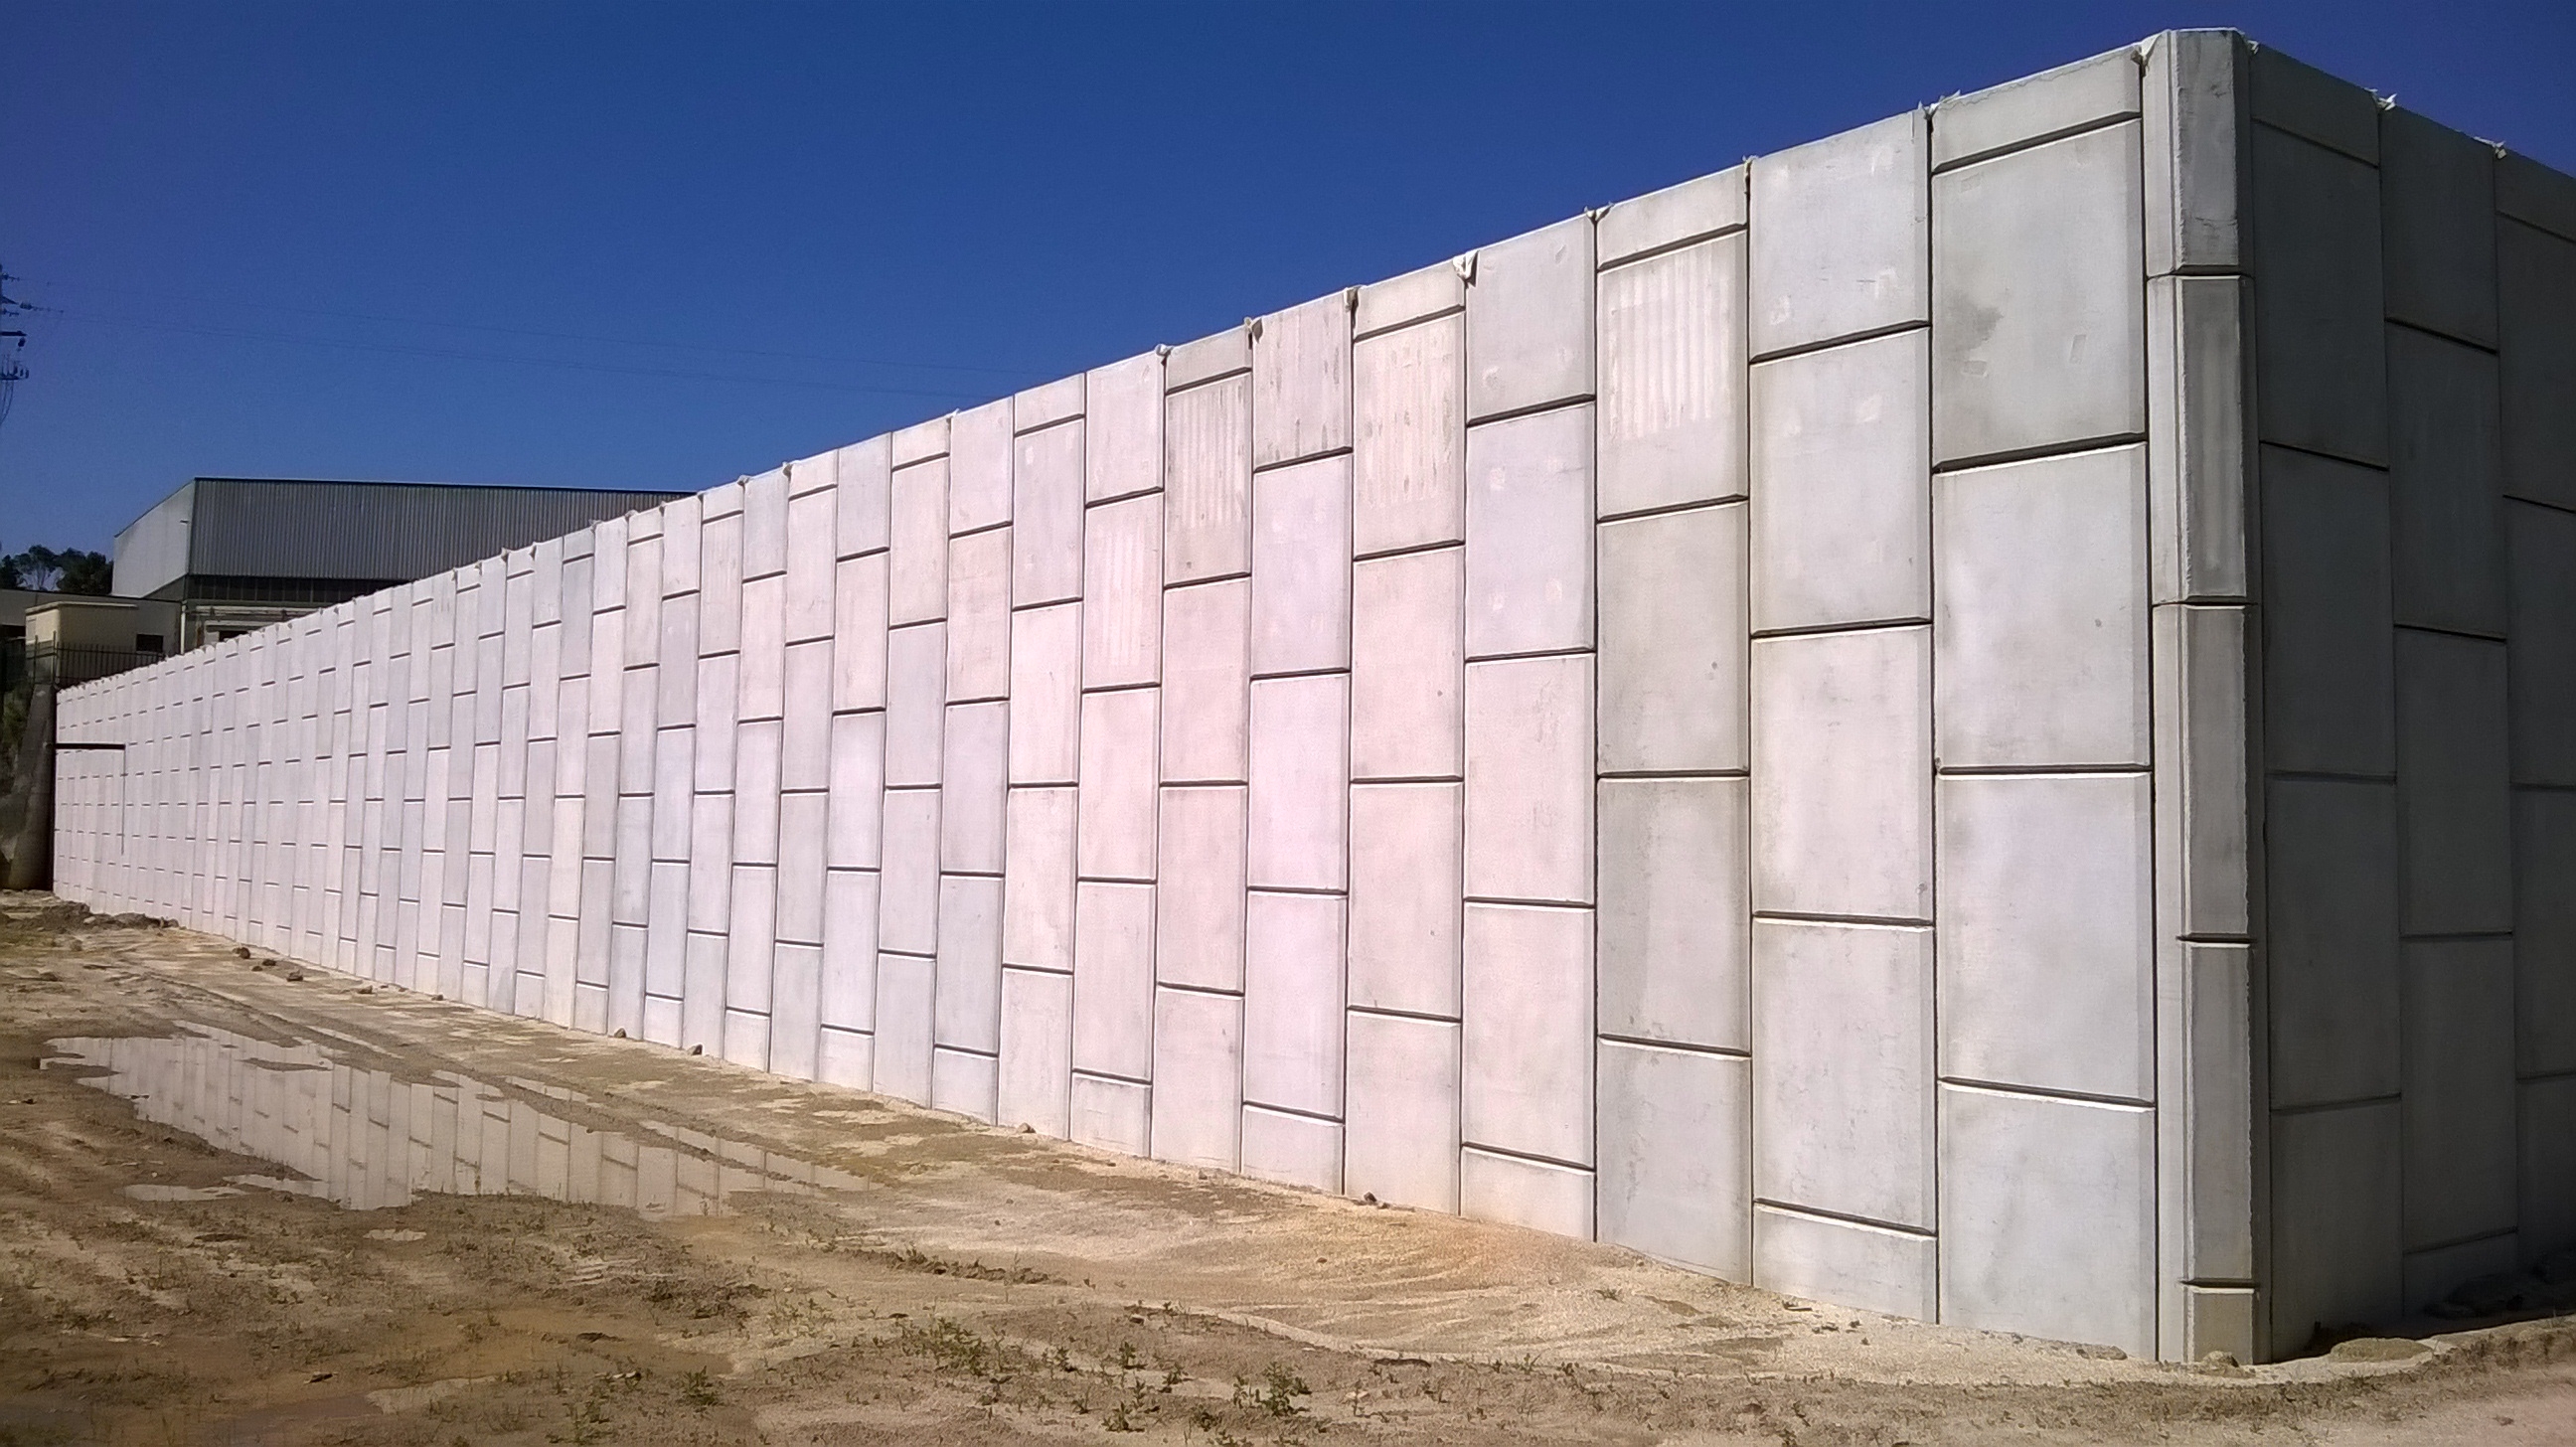 “SMART WALL” REINFORCED EARTH RETAINING WALLS FOR DUARTESFER, LDA. IN BARCELOS – PORTUGAL